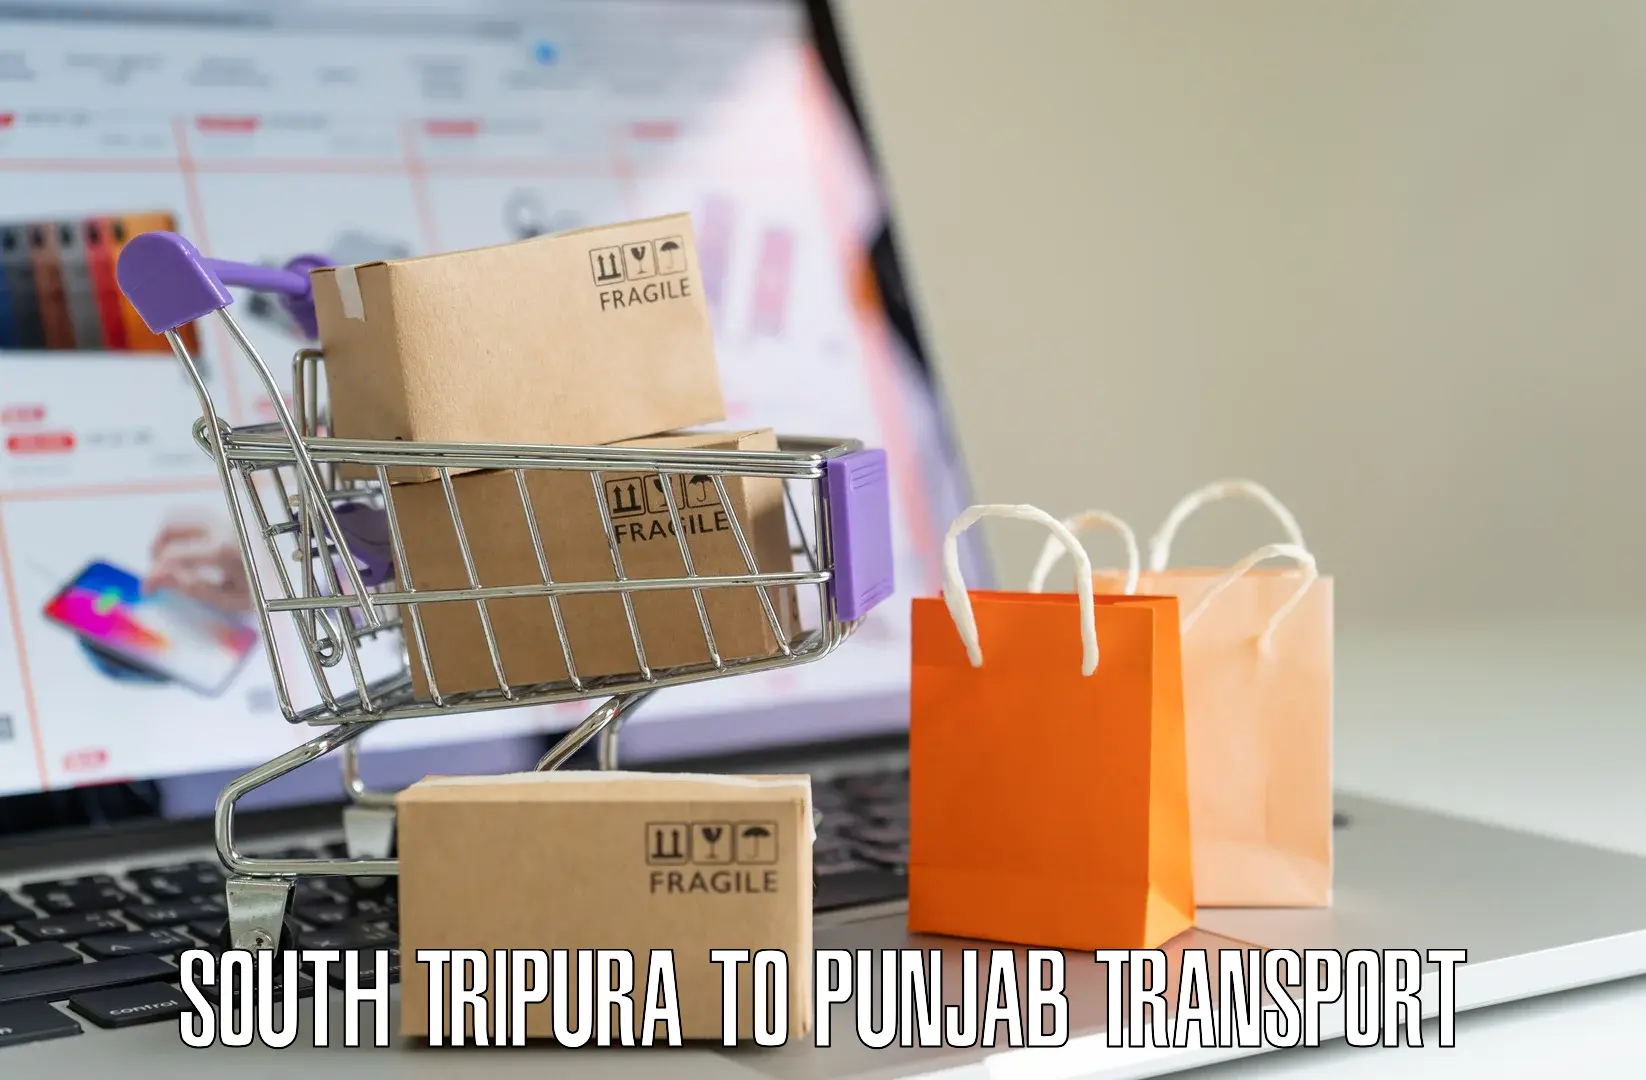 Cargo train transport services in South Tripura to Punjab